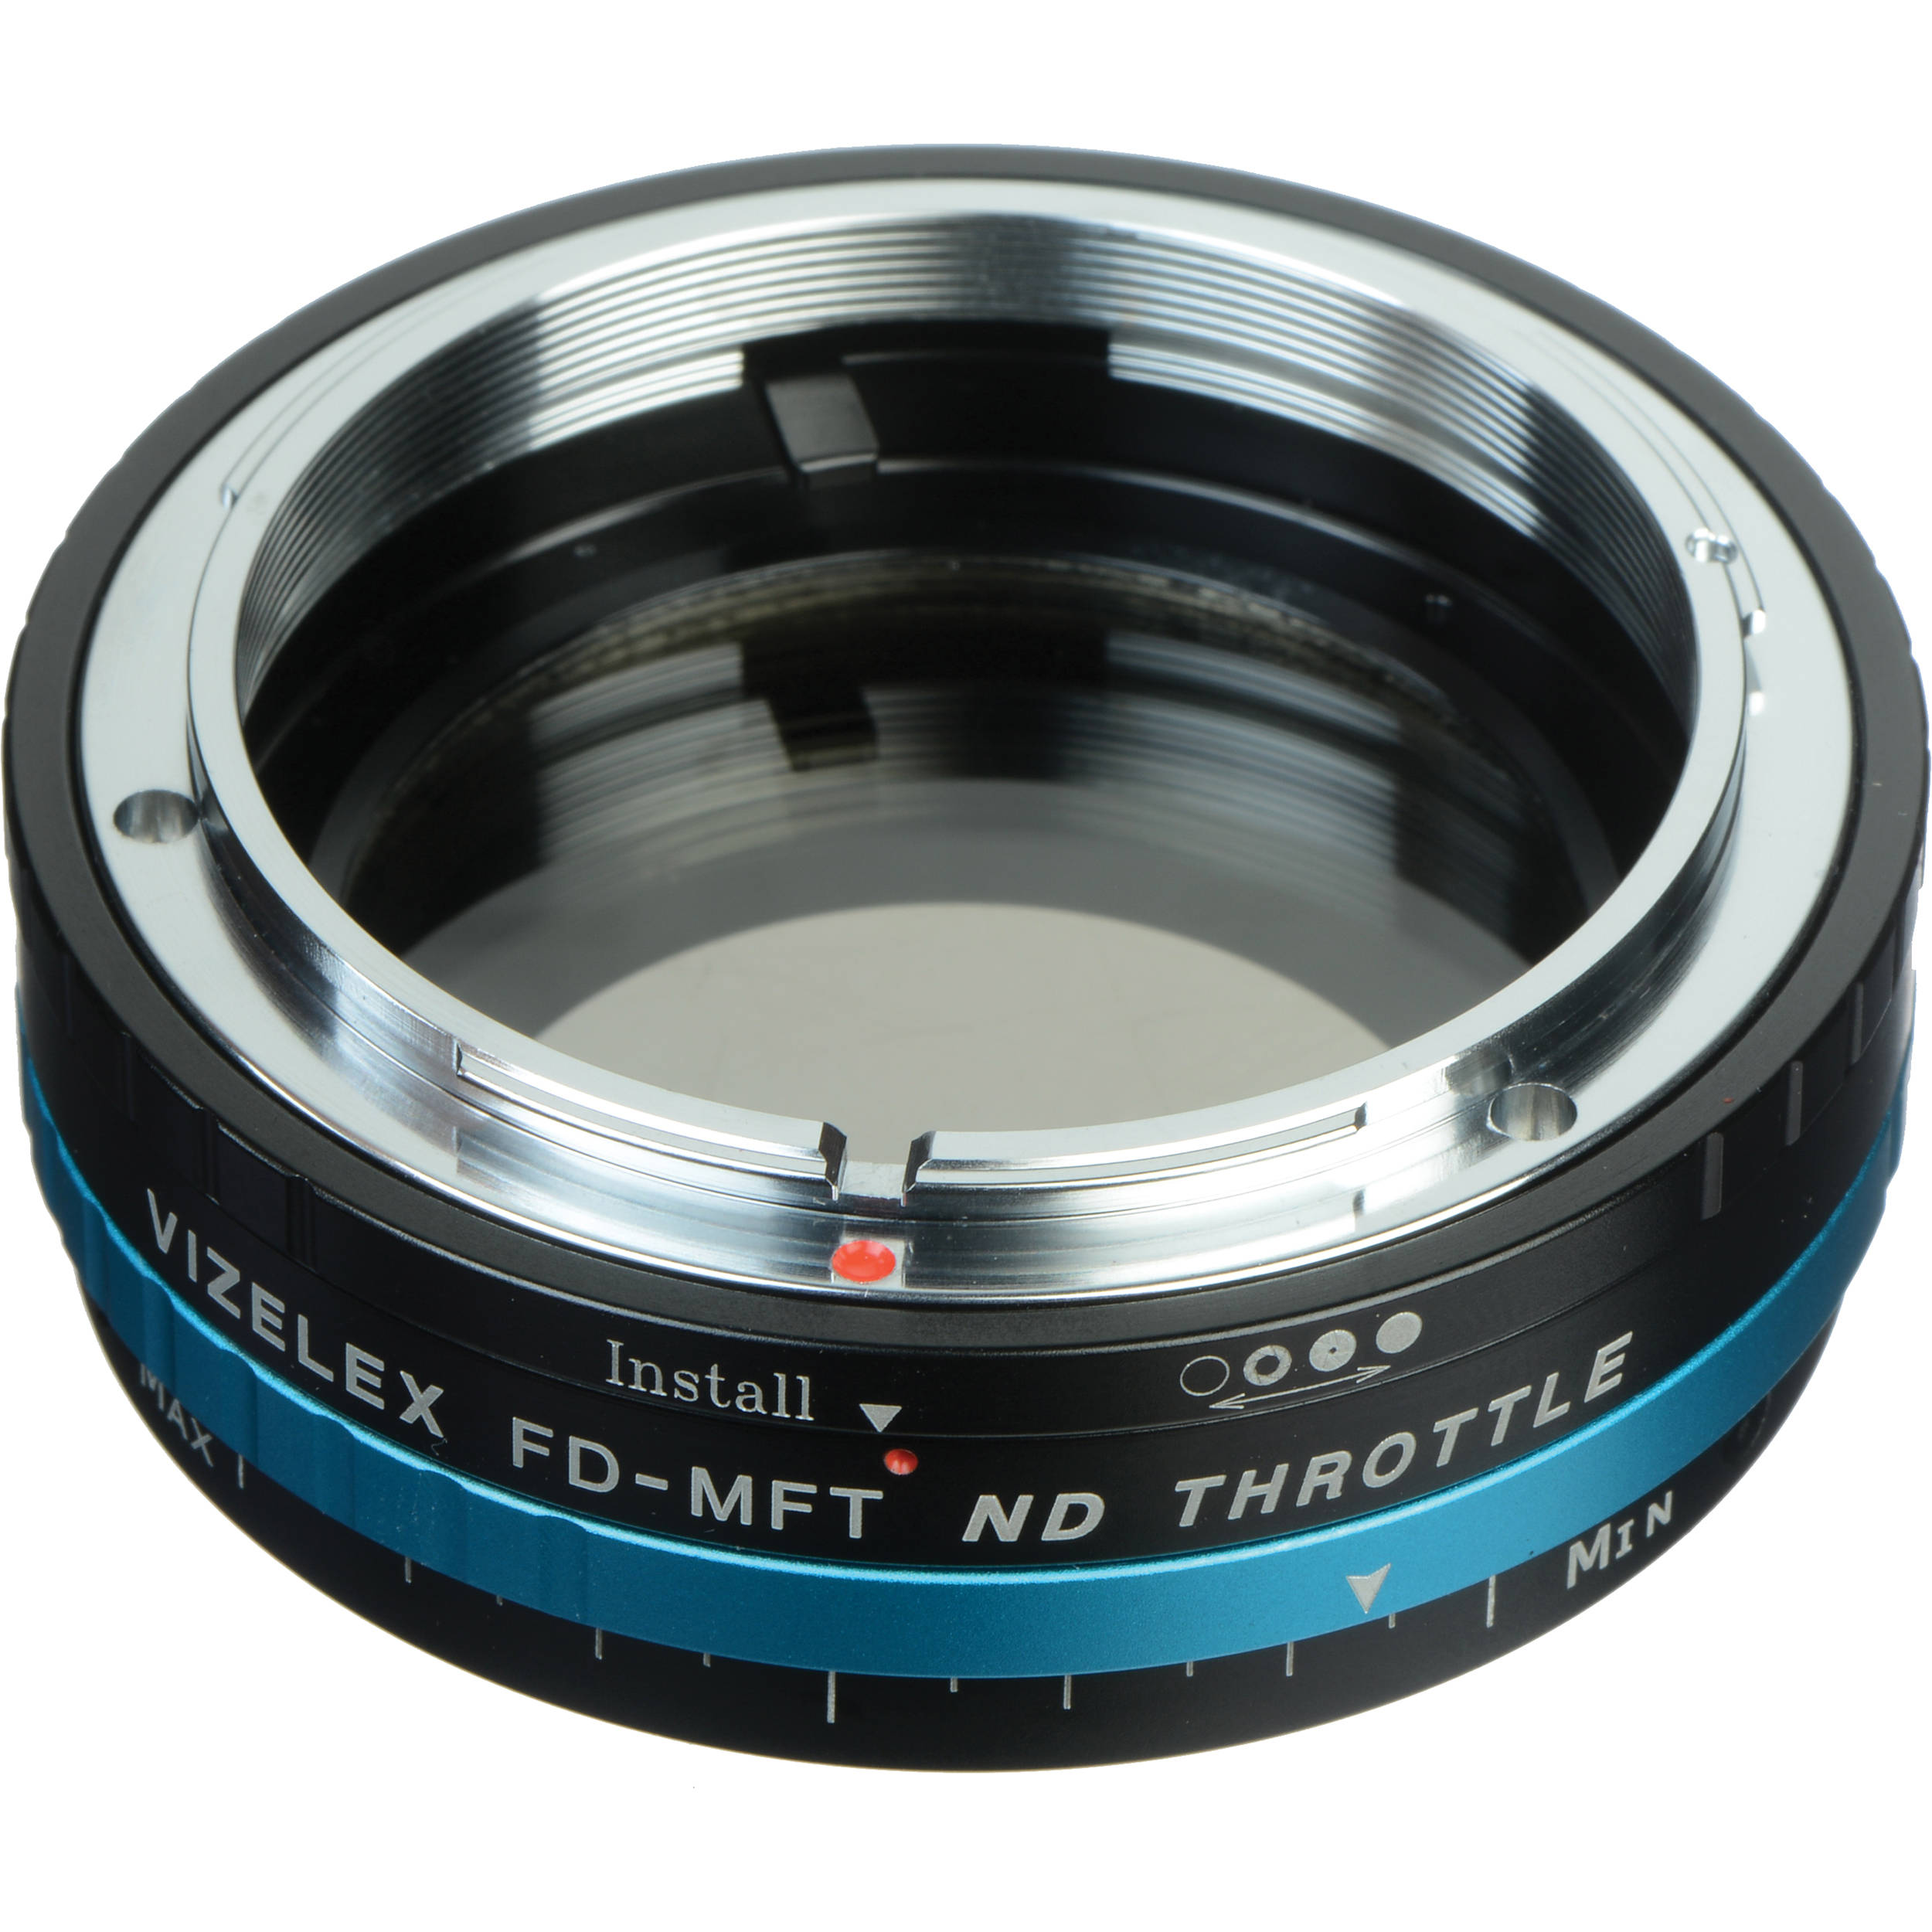 Fotodiox Canon Fd Lens To Micro Four Thirds Fd Mft Ndthrtl Pro